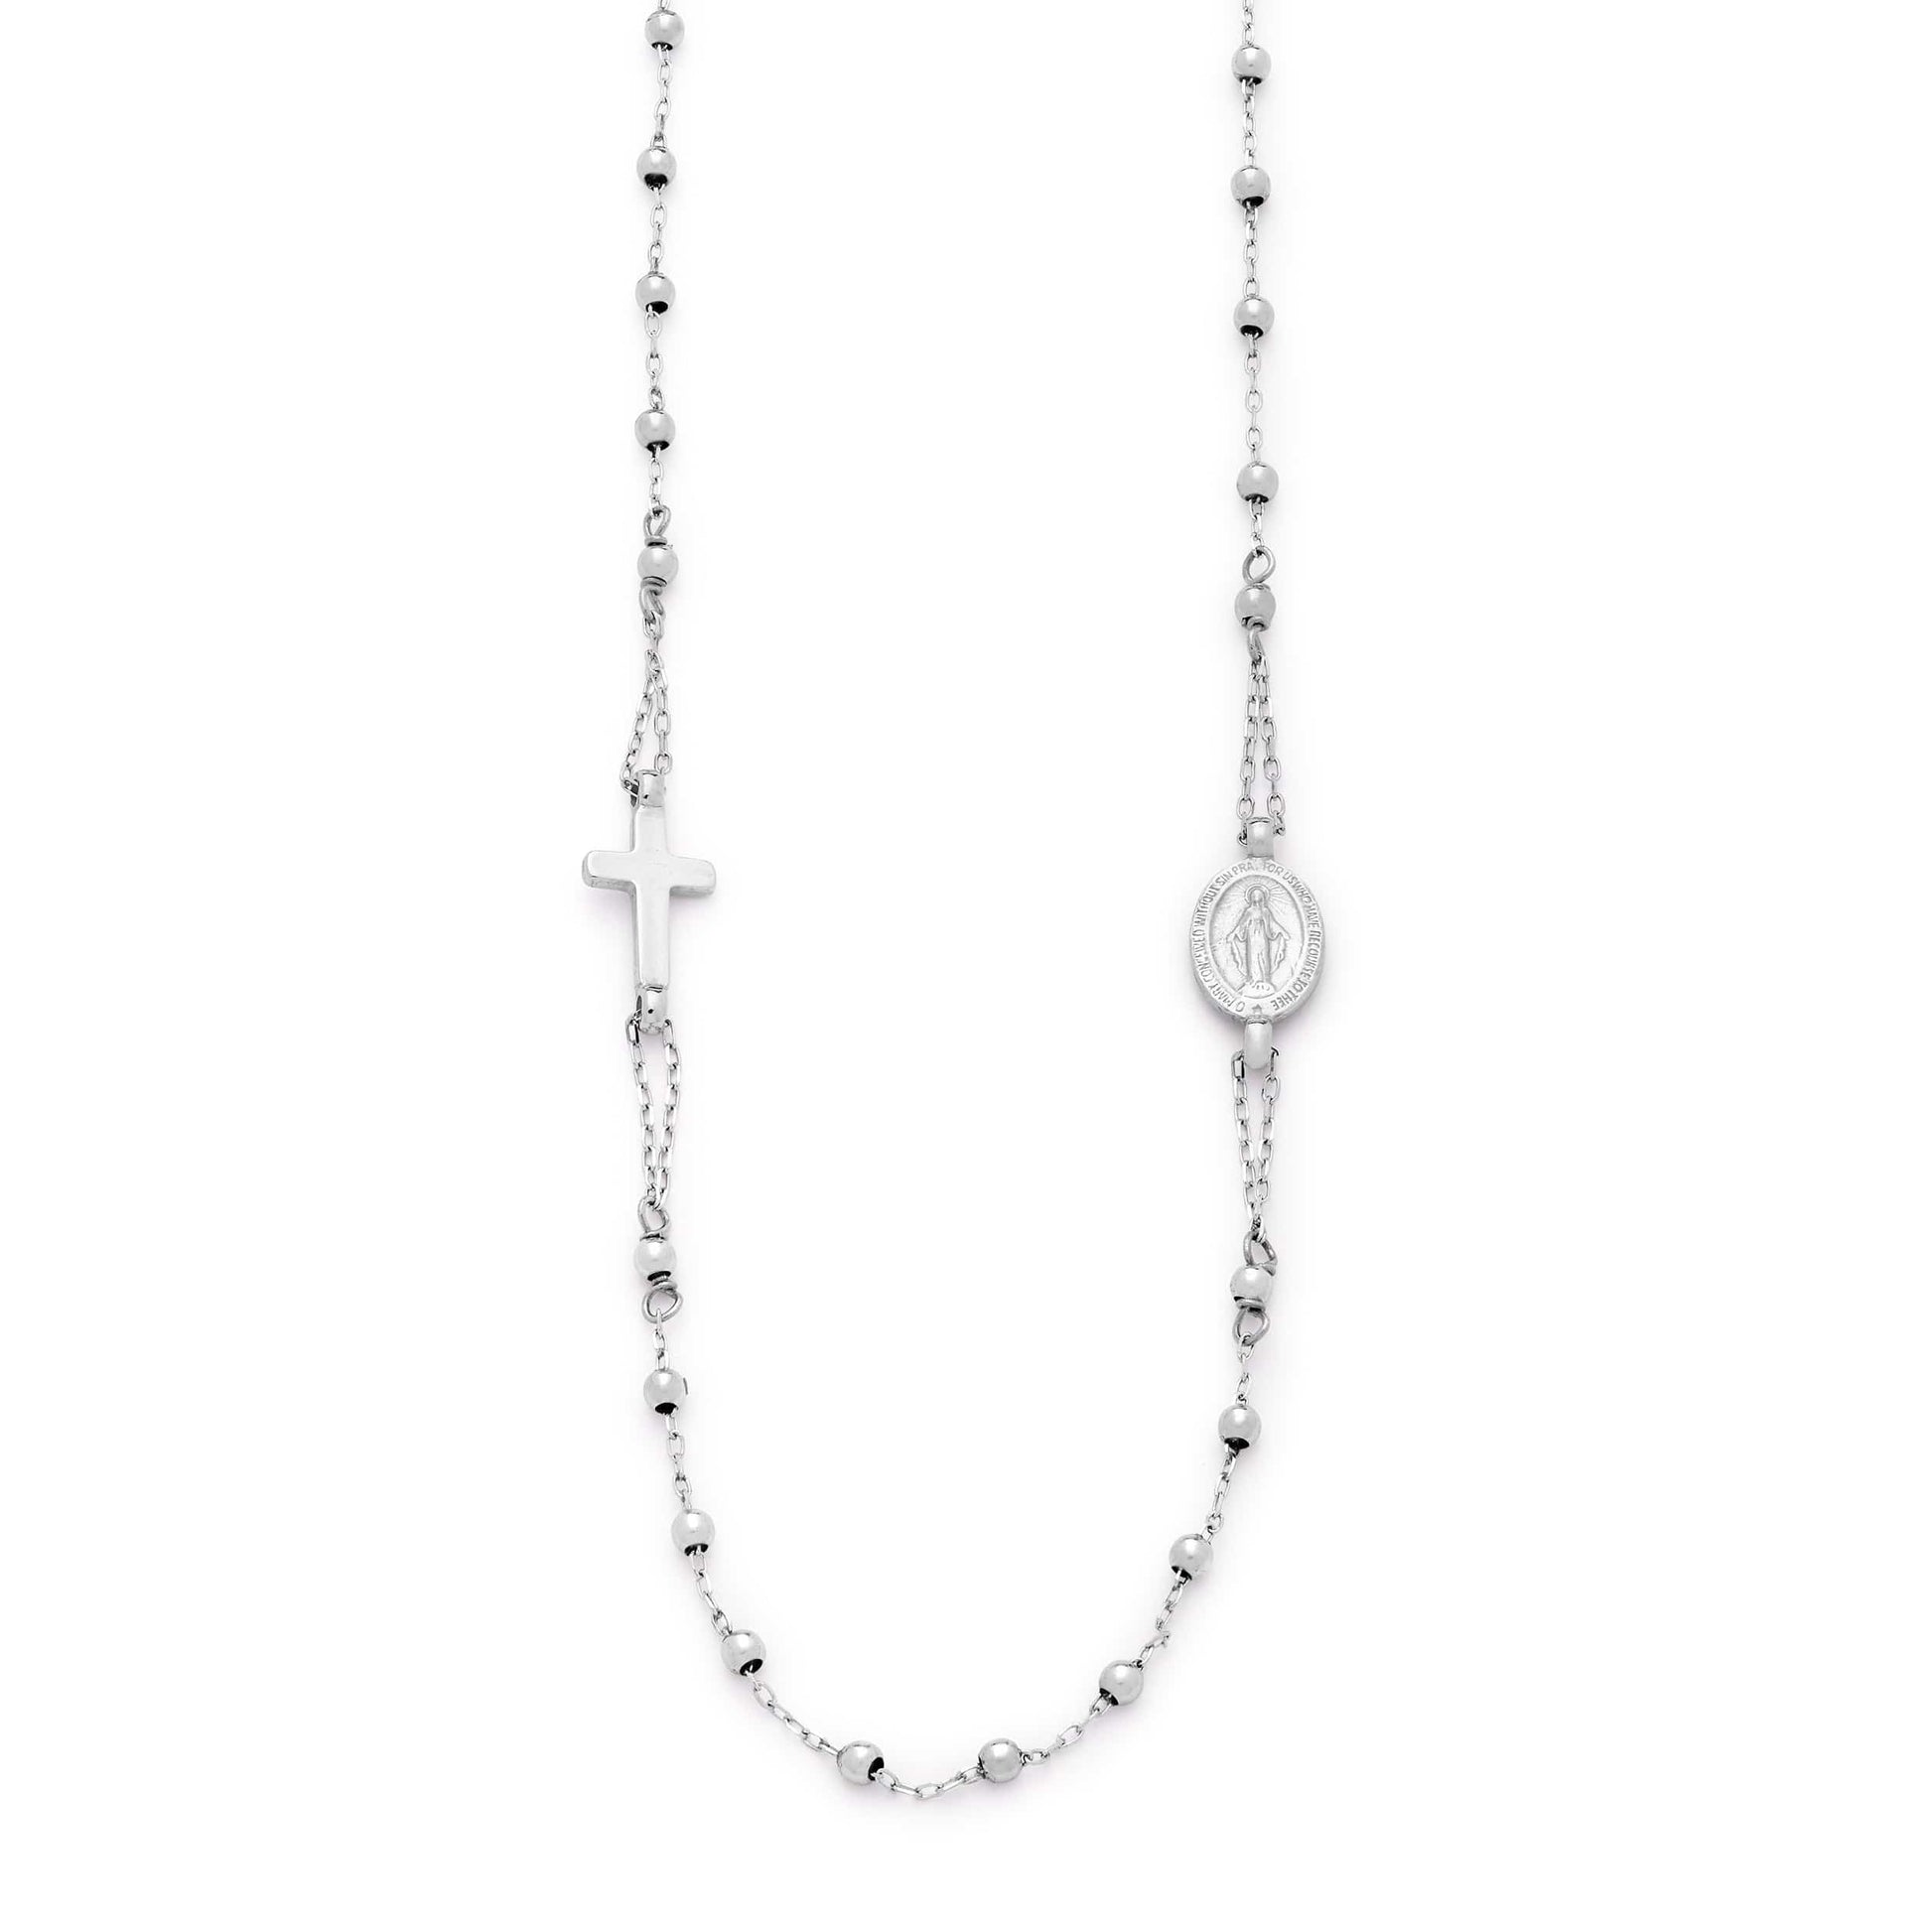 MONDO CATTOLICO Prayer Beads 23 cm (9.0 in) / 1 mm (0.03 in) White Gold Simple Rosary Beads Necklace